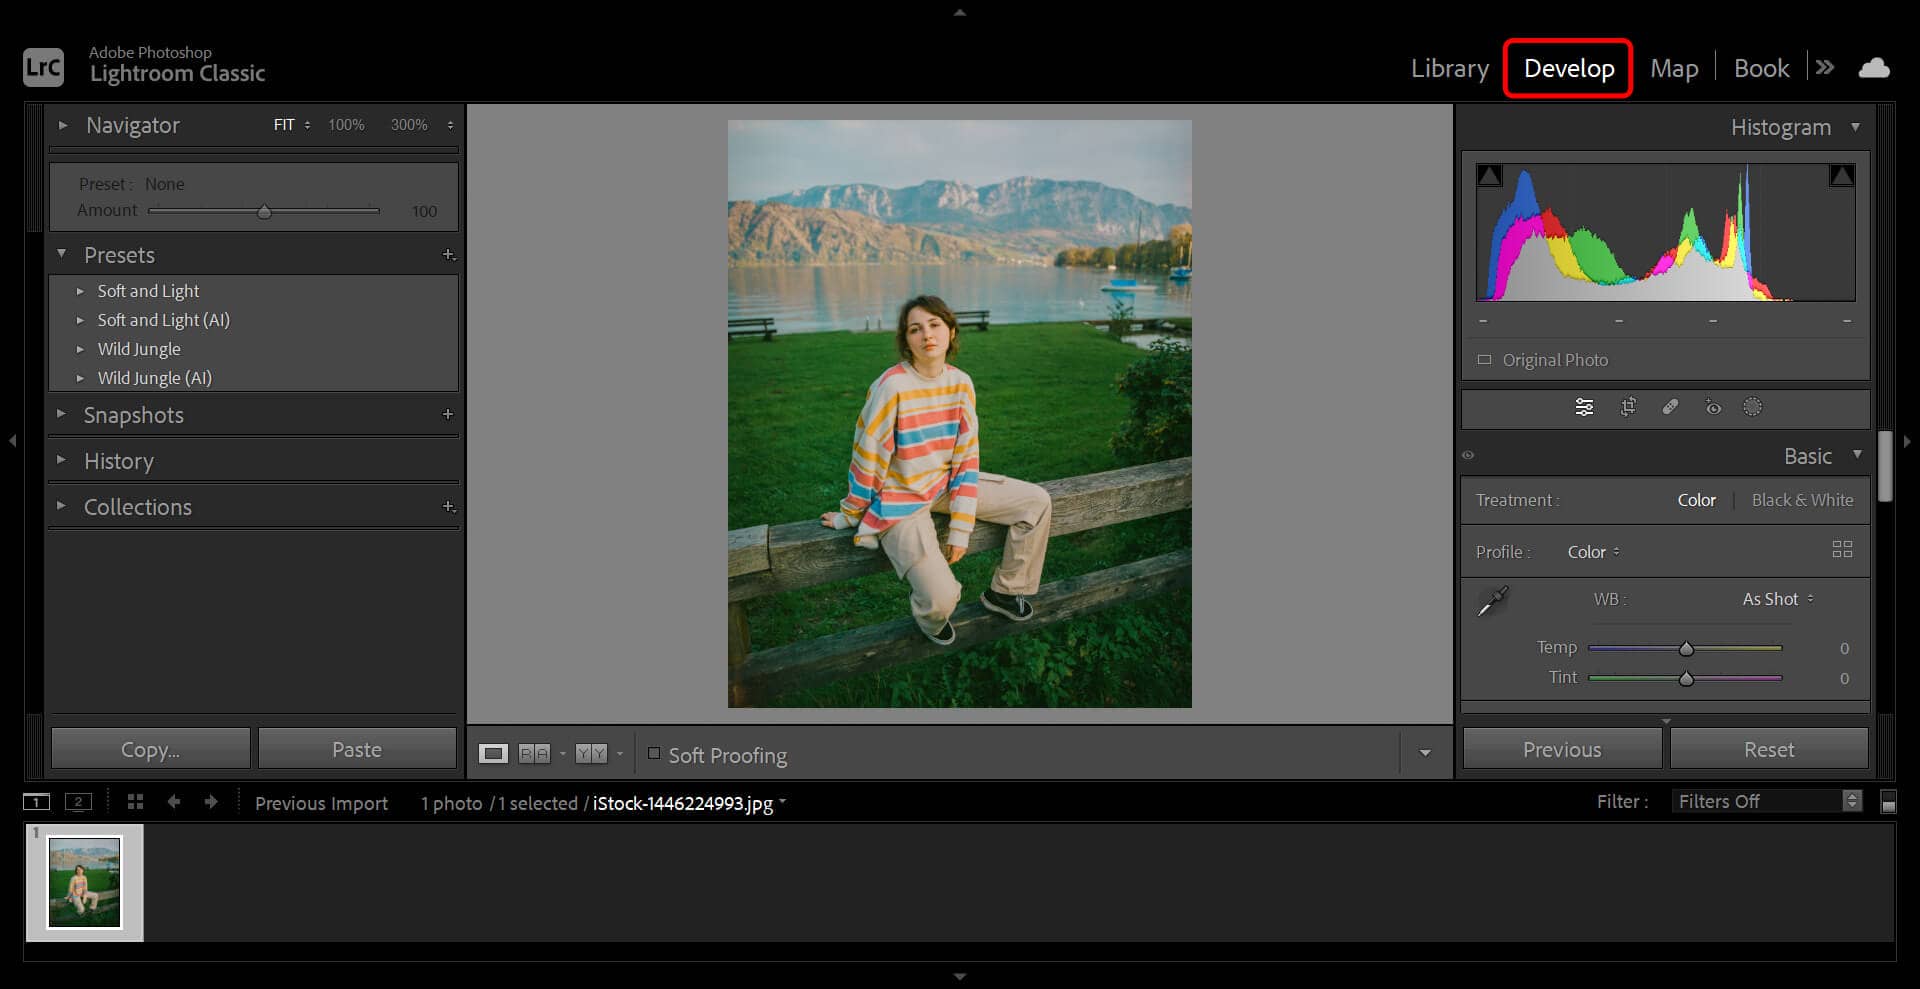 Screenshot of Lightroom Classic interface with a red outline highlighting the location of the Develop tab.